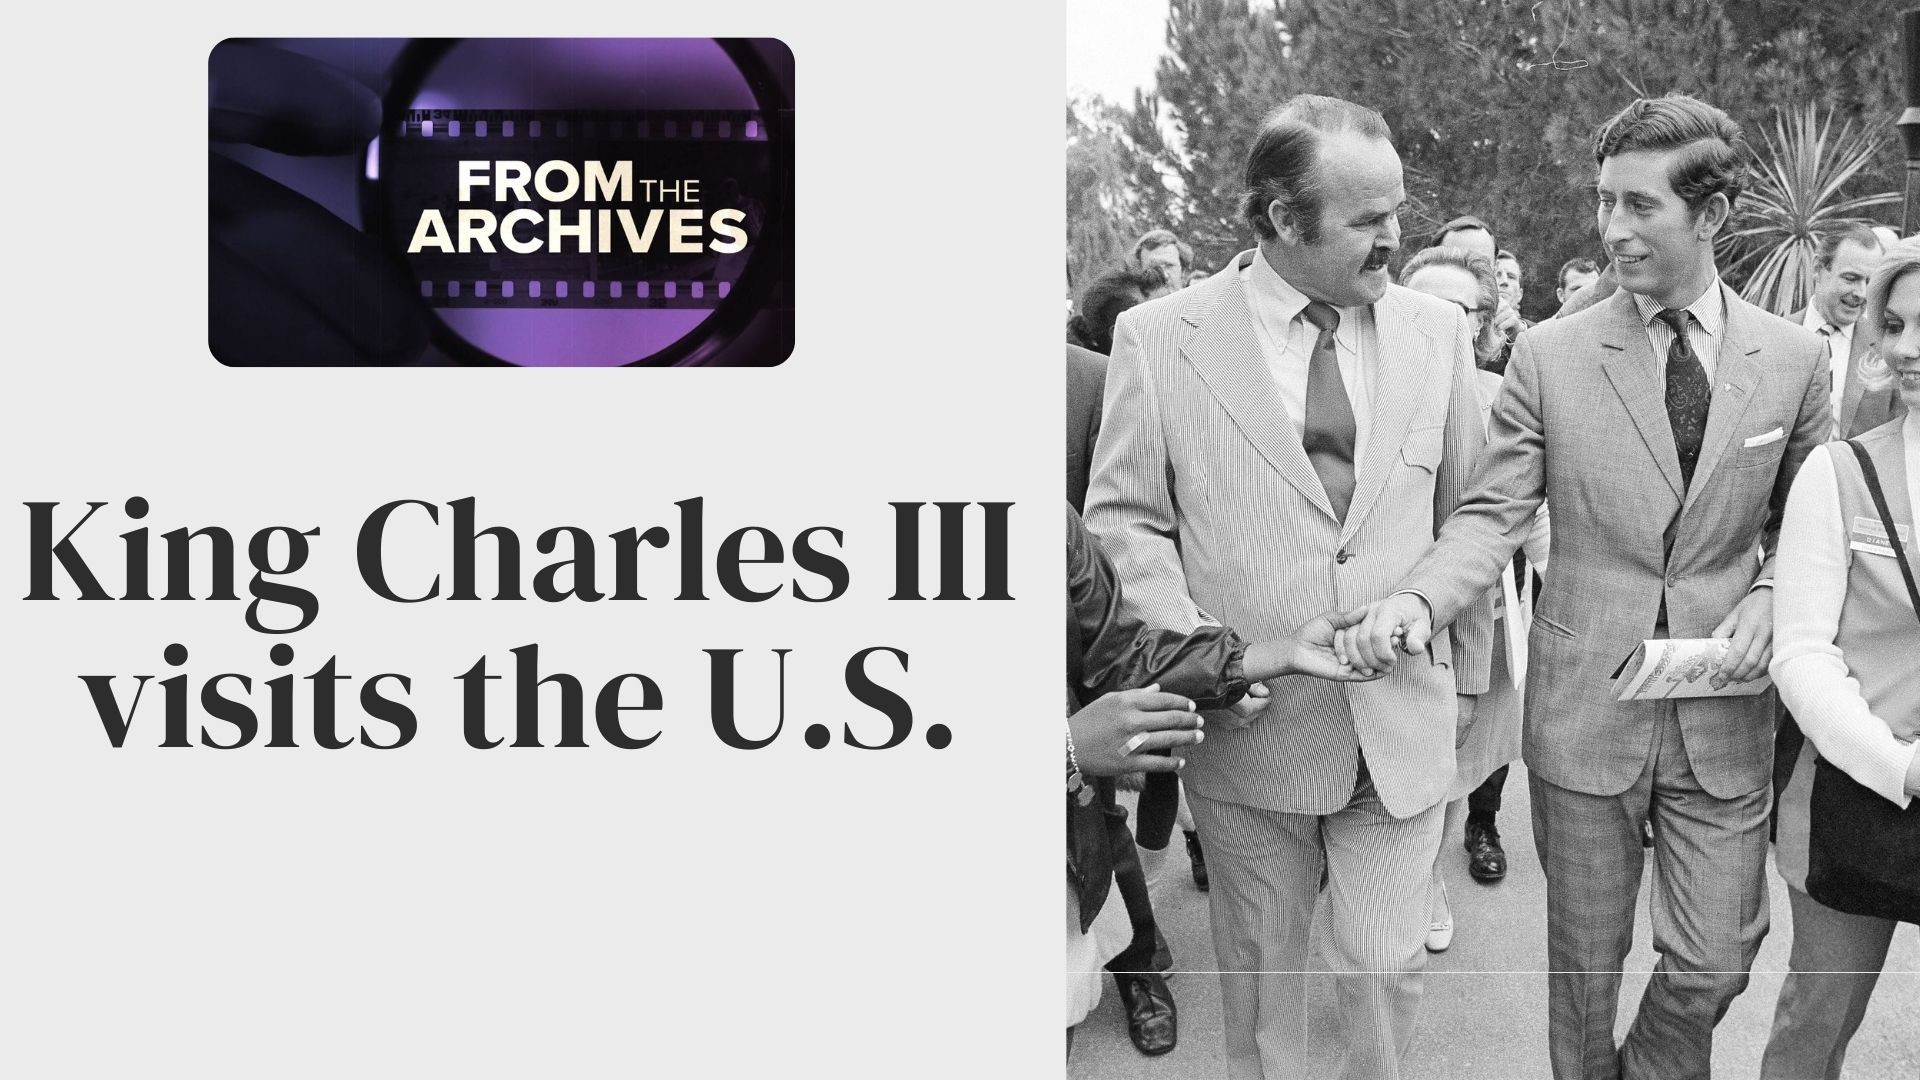 A look back through the archives of past King Charles visits to the U.S. from 1974 to 2015.